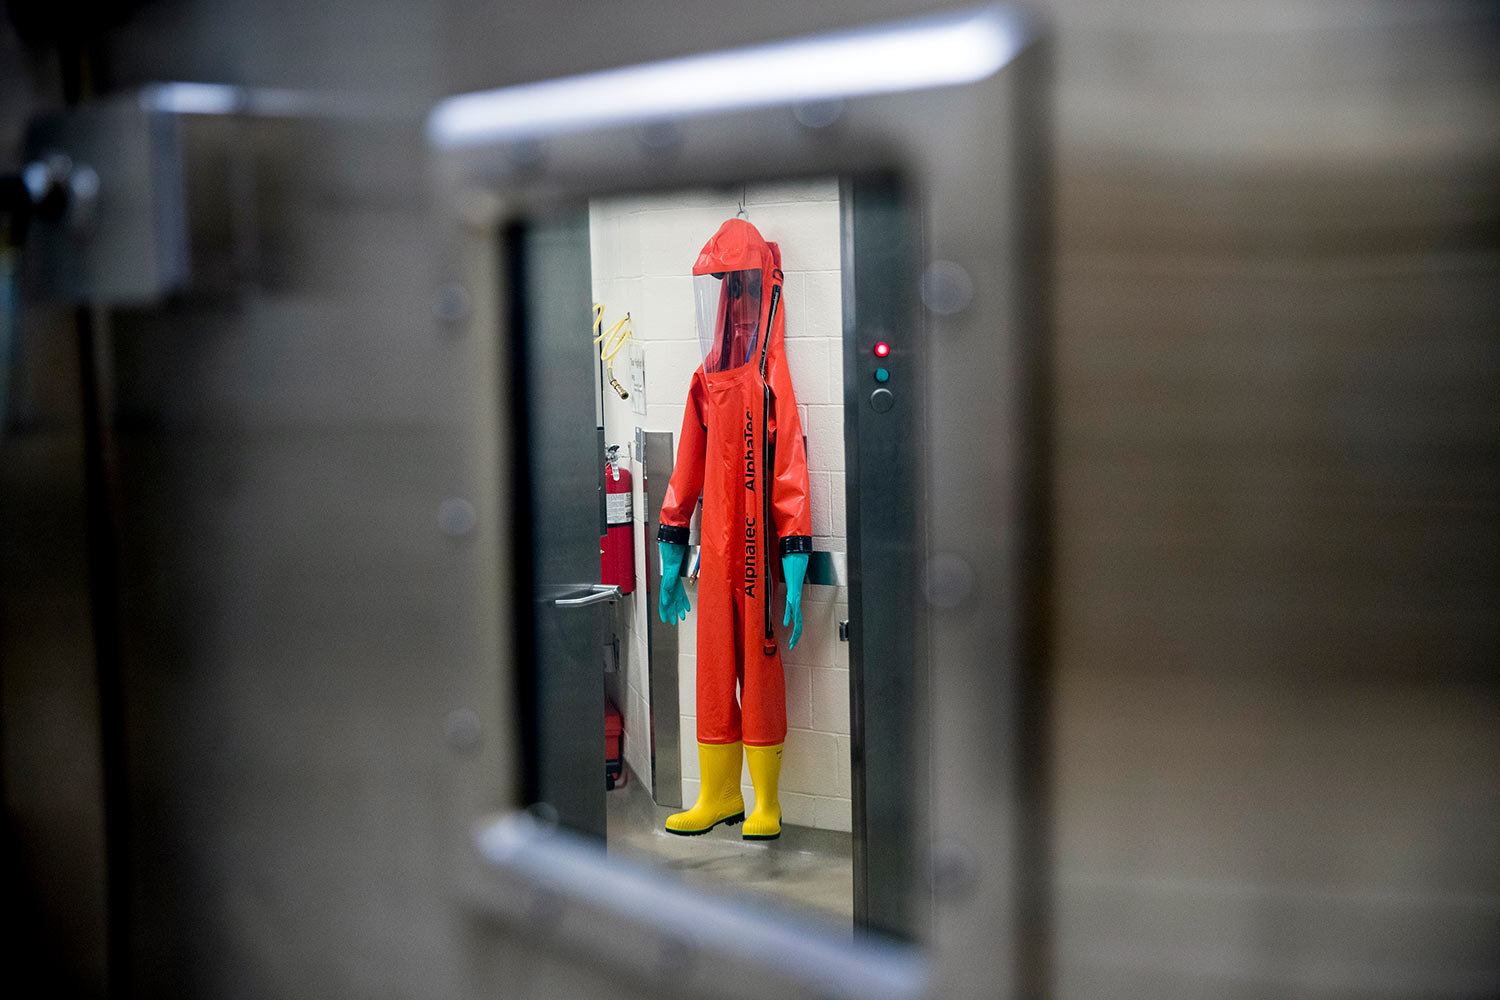  A biosafety protective suit for handling viral diseases are hung up in a biosafety level 4 training facility at U.S. Army Medical Research and Development Command at Fort Detrick in Frederick, Md., March 19, 2020, where scientists are working to hel